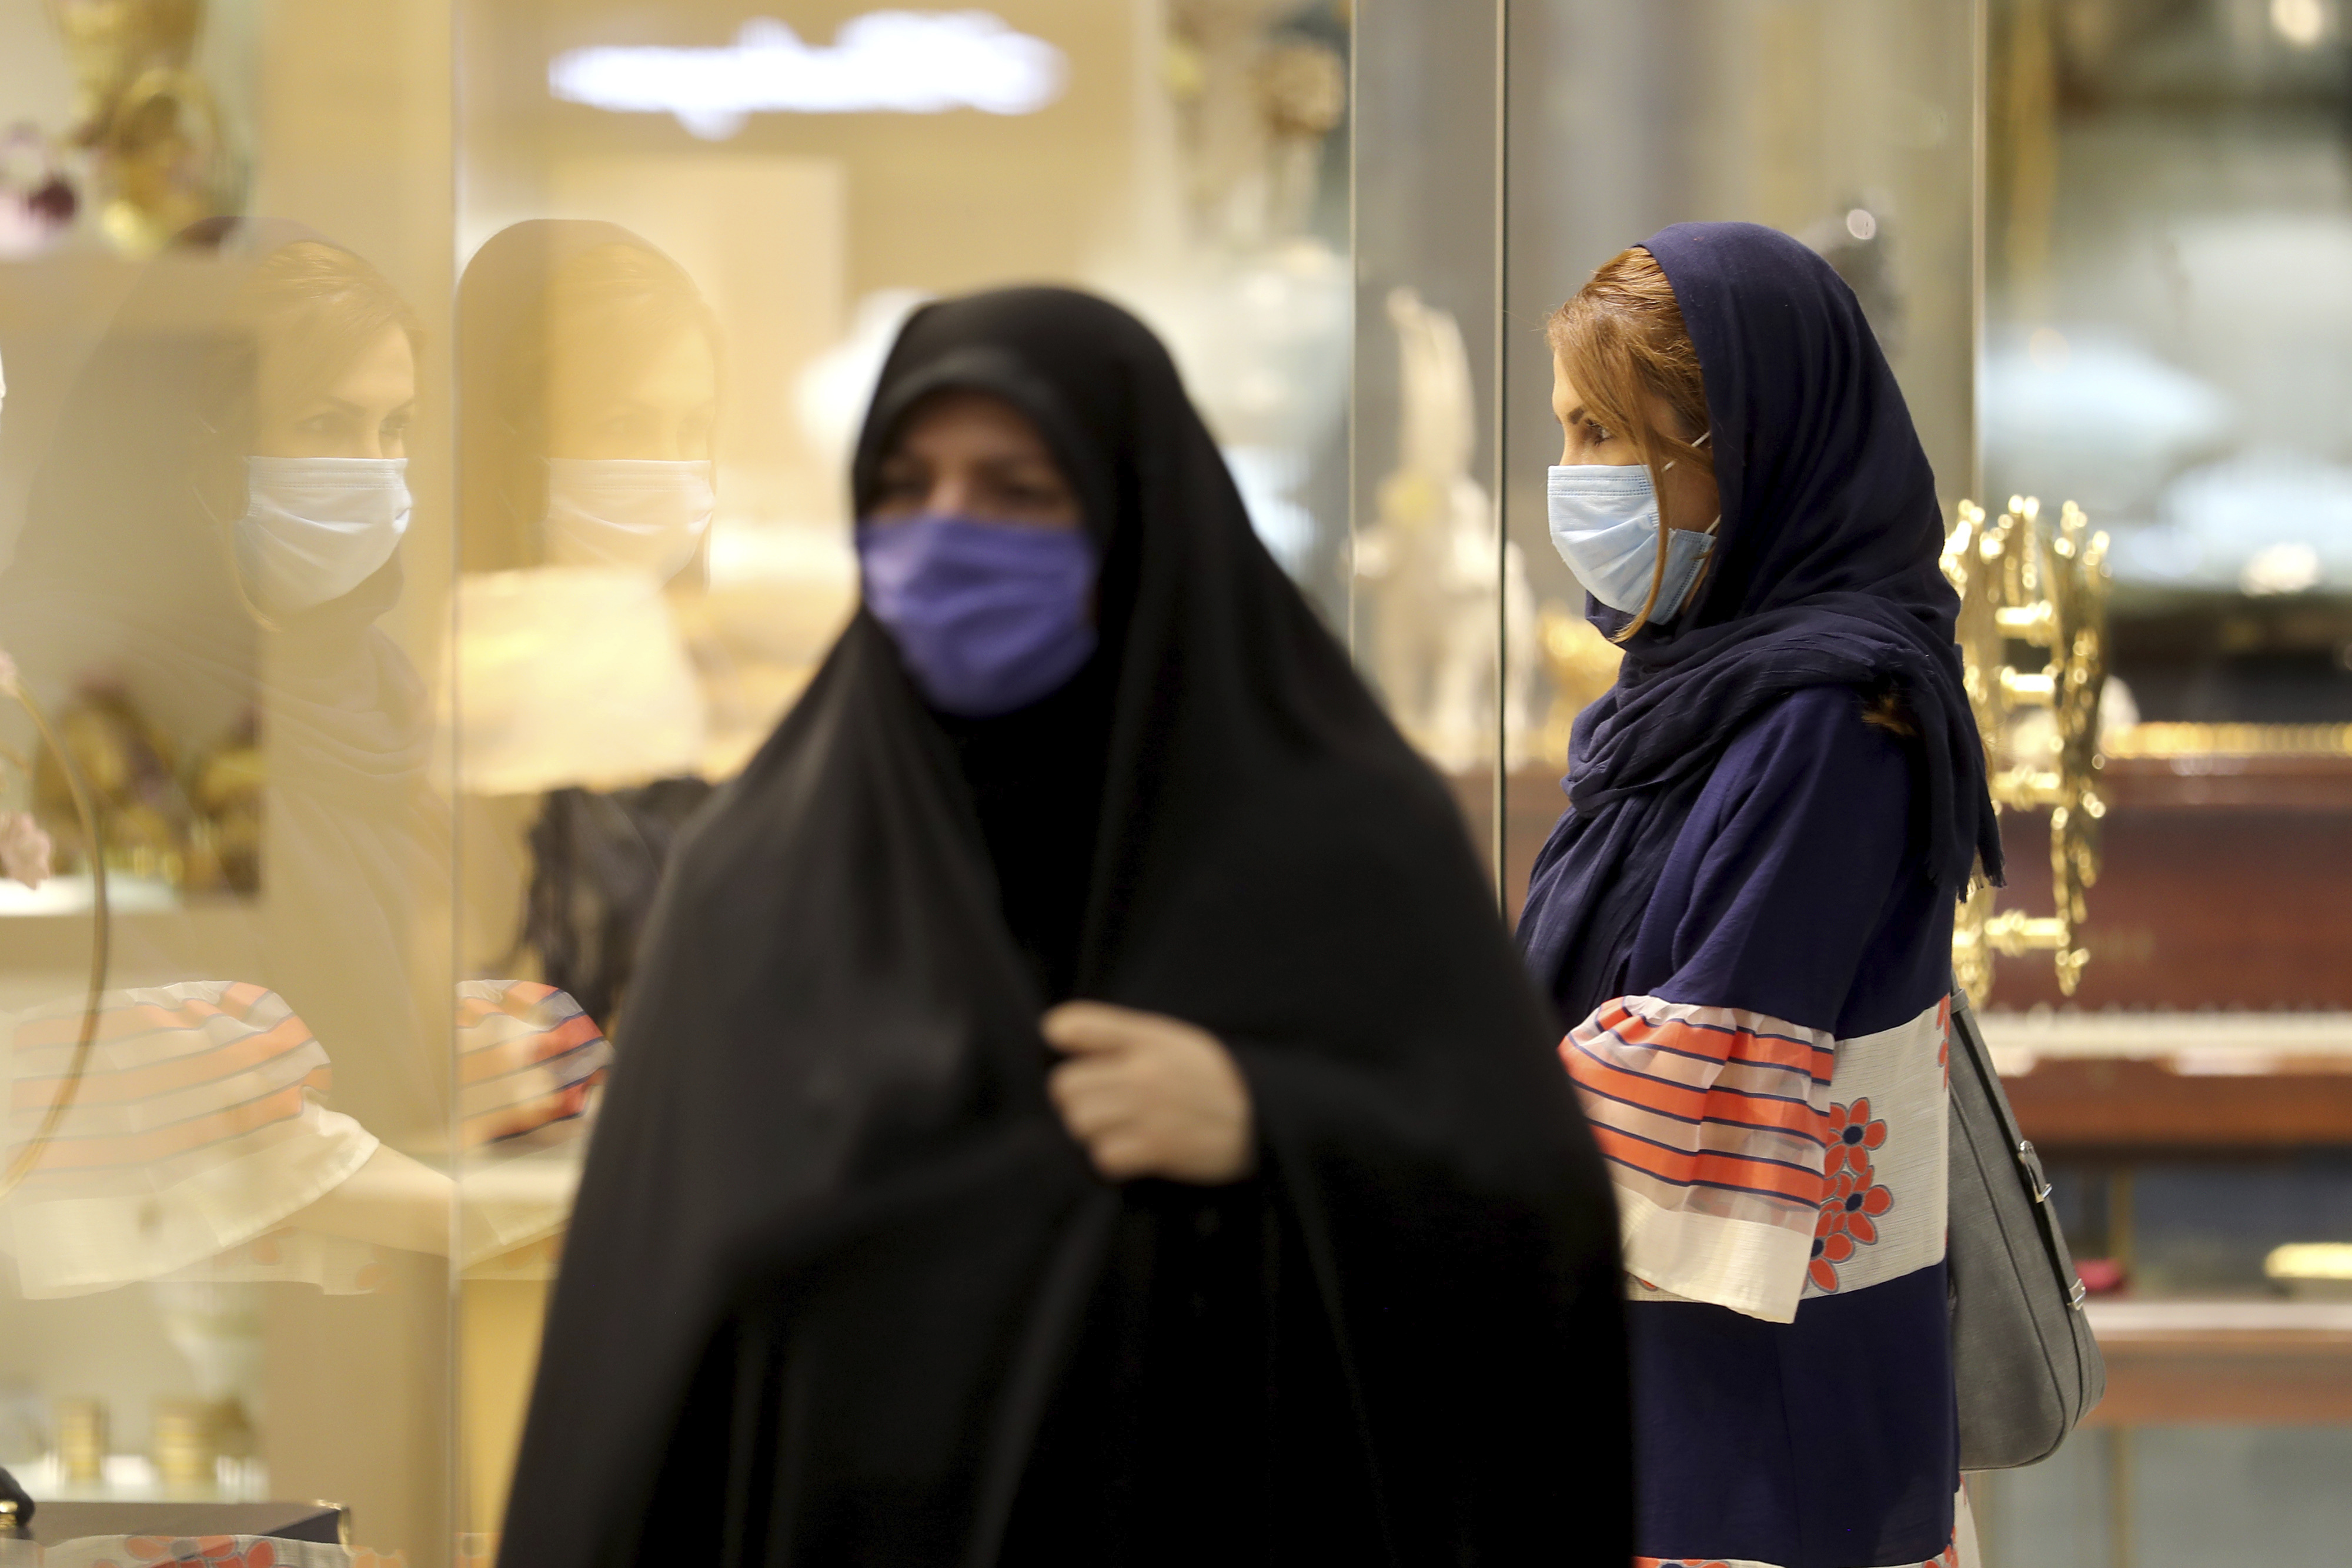 Women wearing protective face masks to help prevent spread of the coronavirus walk through a shopping center, in Tehran, Iran, Wednesday, Aug. 19, 2020. Iran surpassed 20,000 confirmed deaths from the coronavirus on Wednesday, the health ministry said — the highest death toll for any Middle East country so far in the pandemic. (AP Photo/Ebrahim Noroozi)